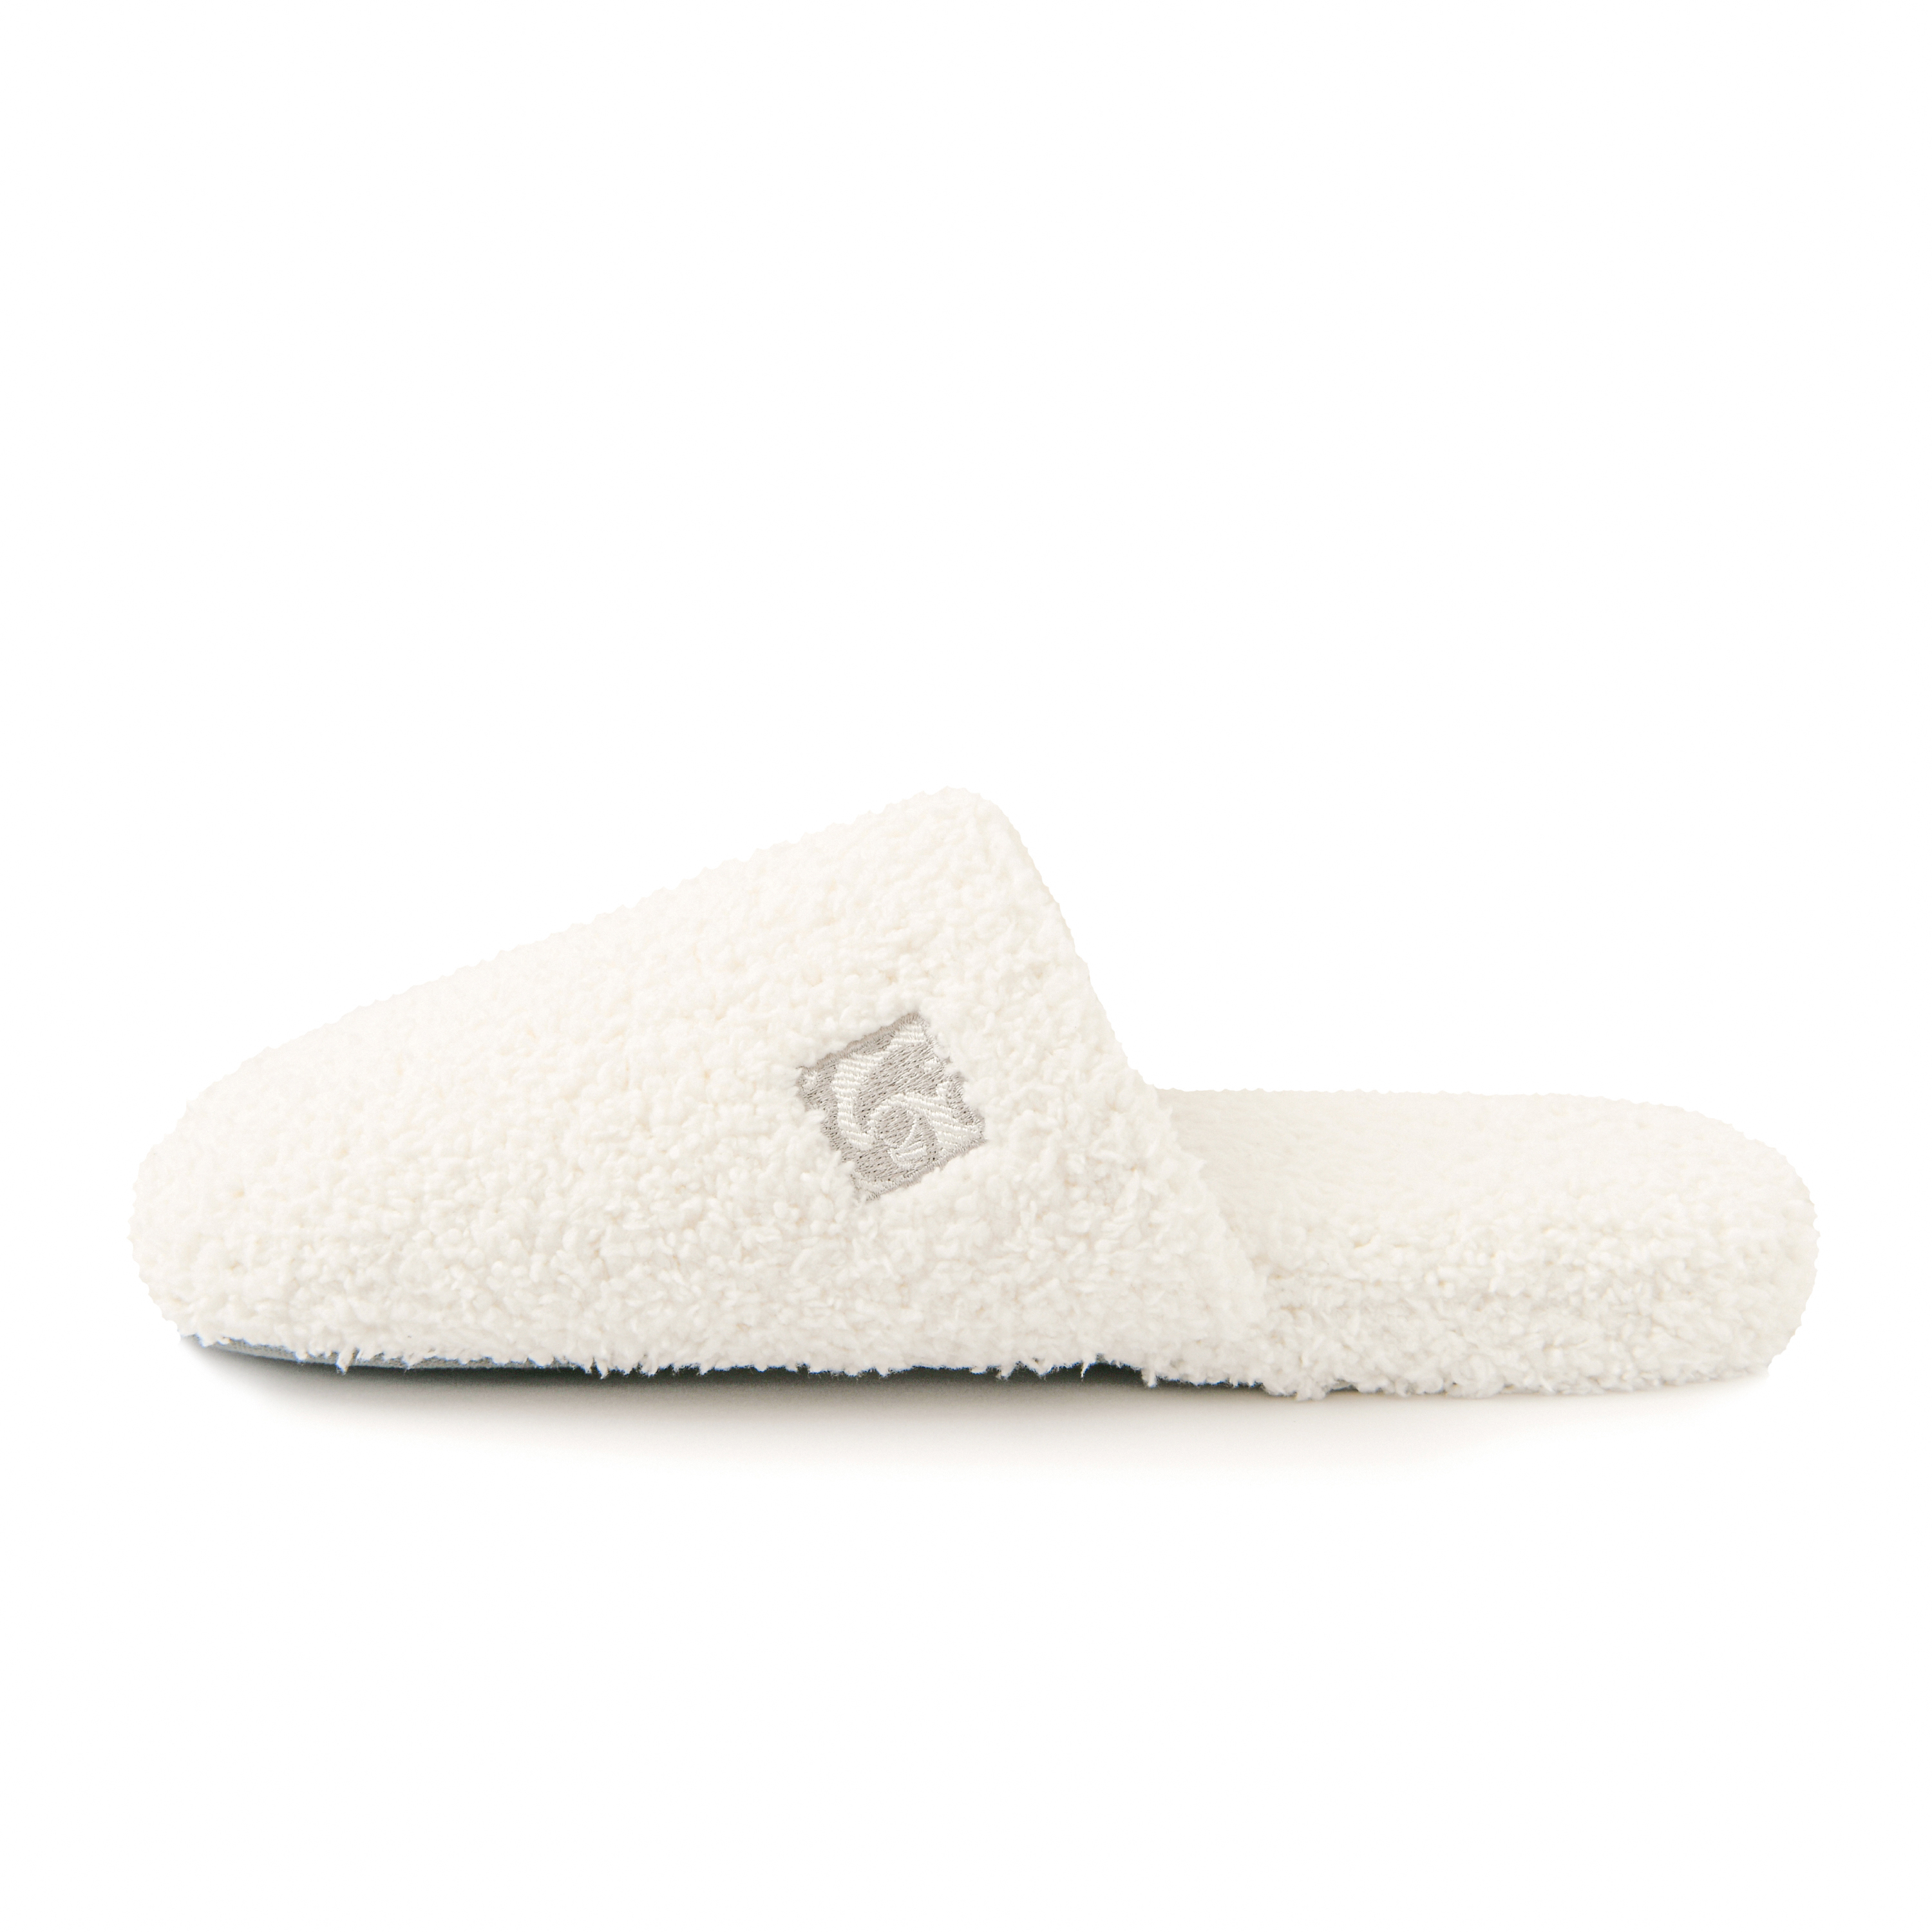 SLIPPERS(L(26-28cm) creme): HOME | kashwere Japan (カシウエア 